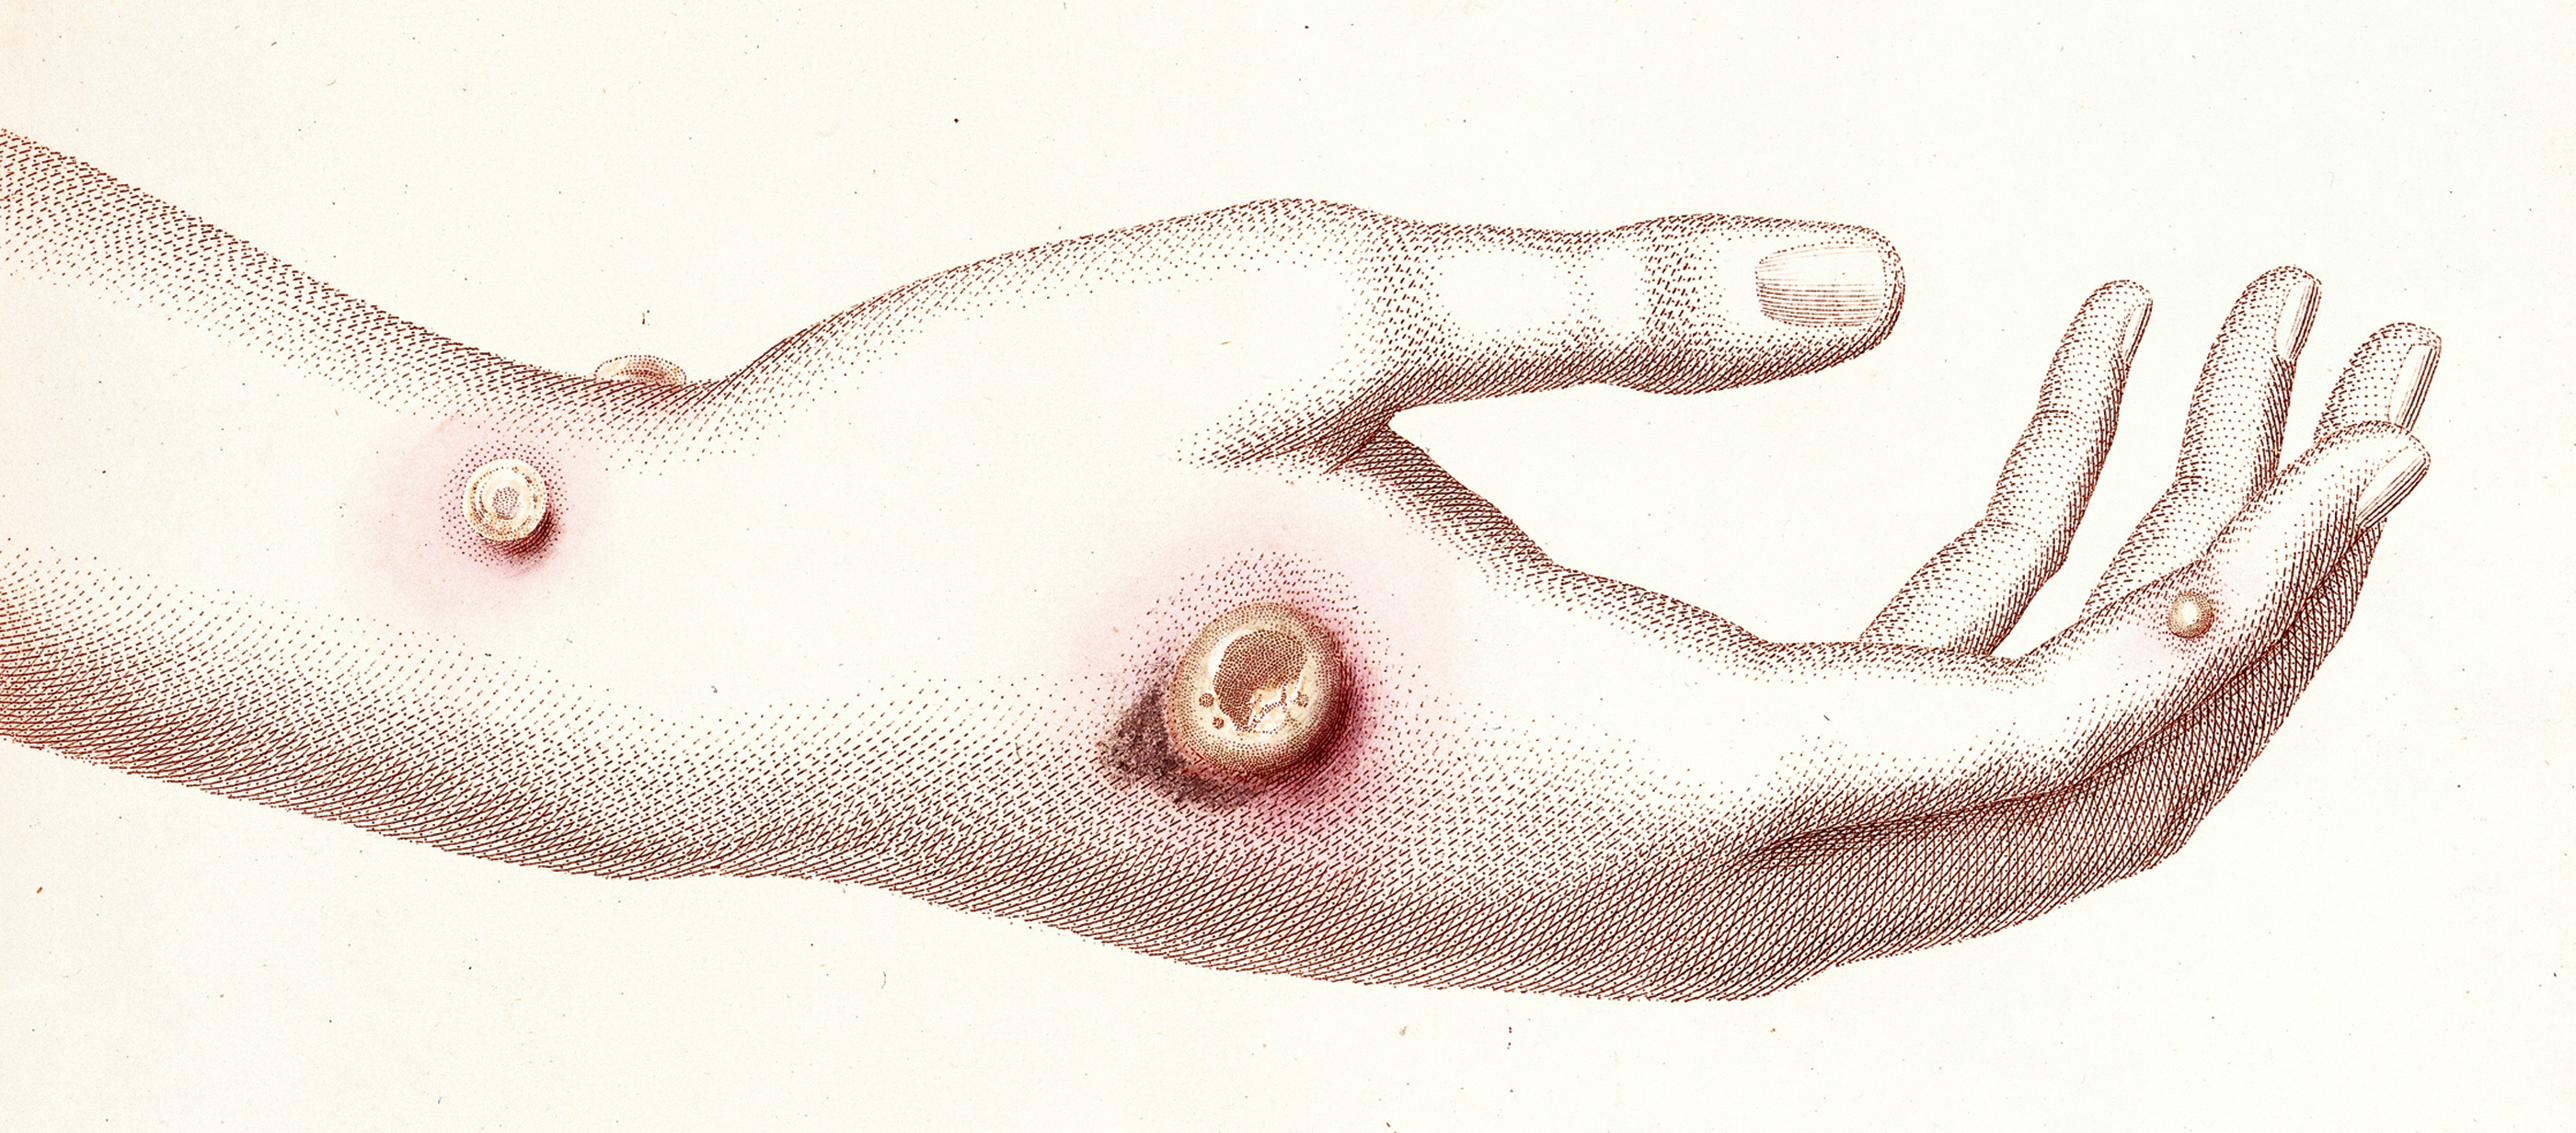 Hand with boils, from An Inquiry into the Causes and Effects of the Variolae Vaccinae, by Edward Jenner, 1798. The Wellcome Library, London. 